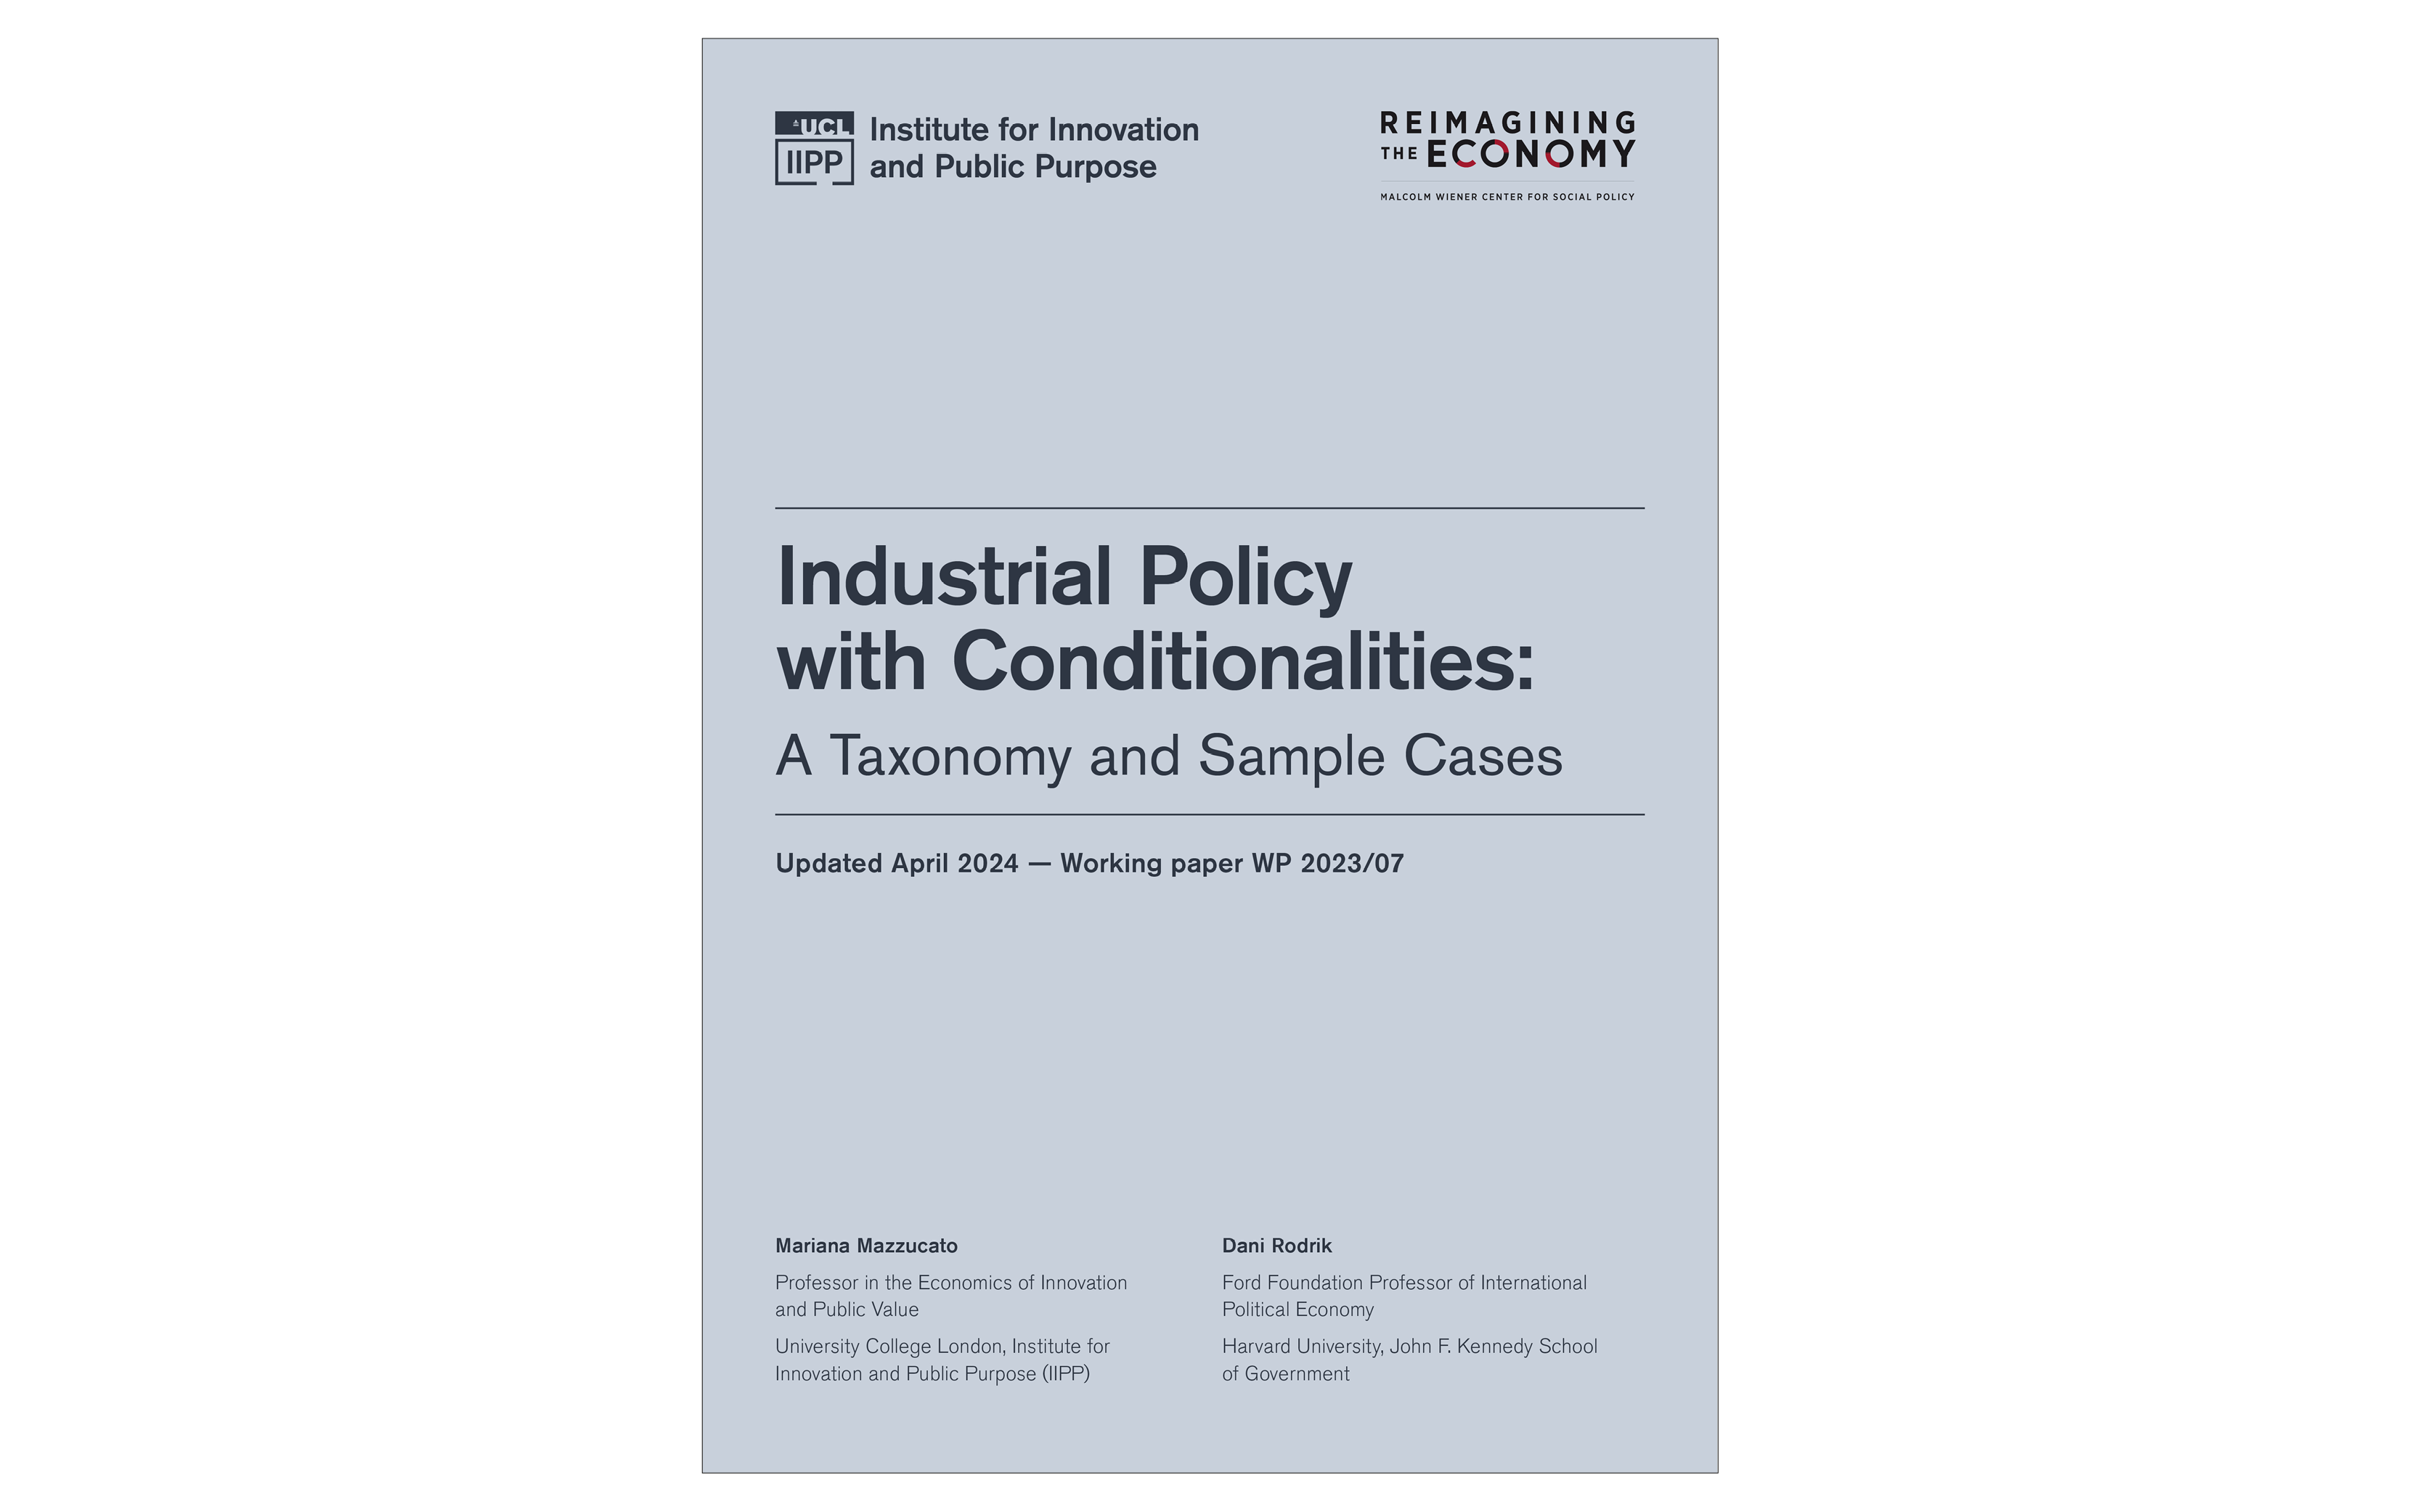 Industrial Policy with Conditionalities